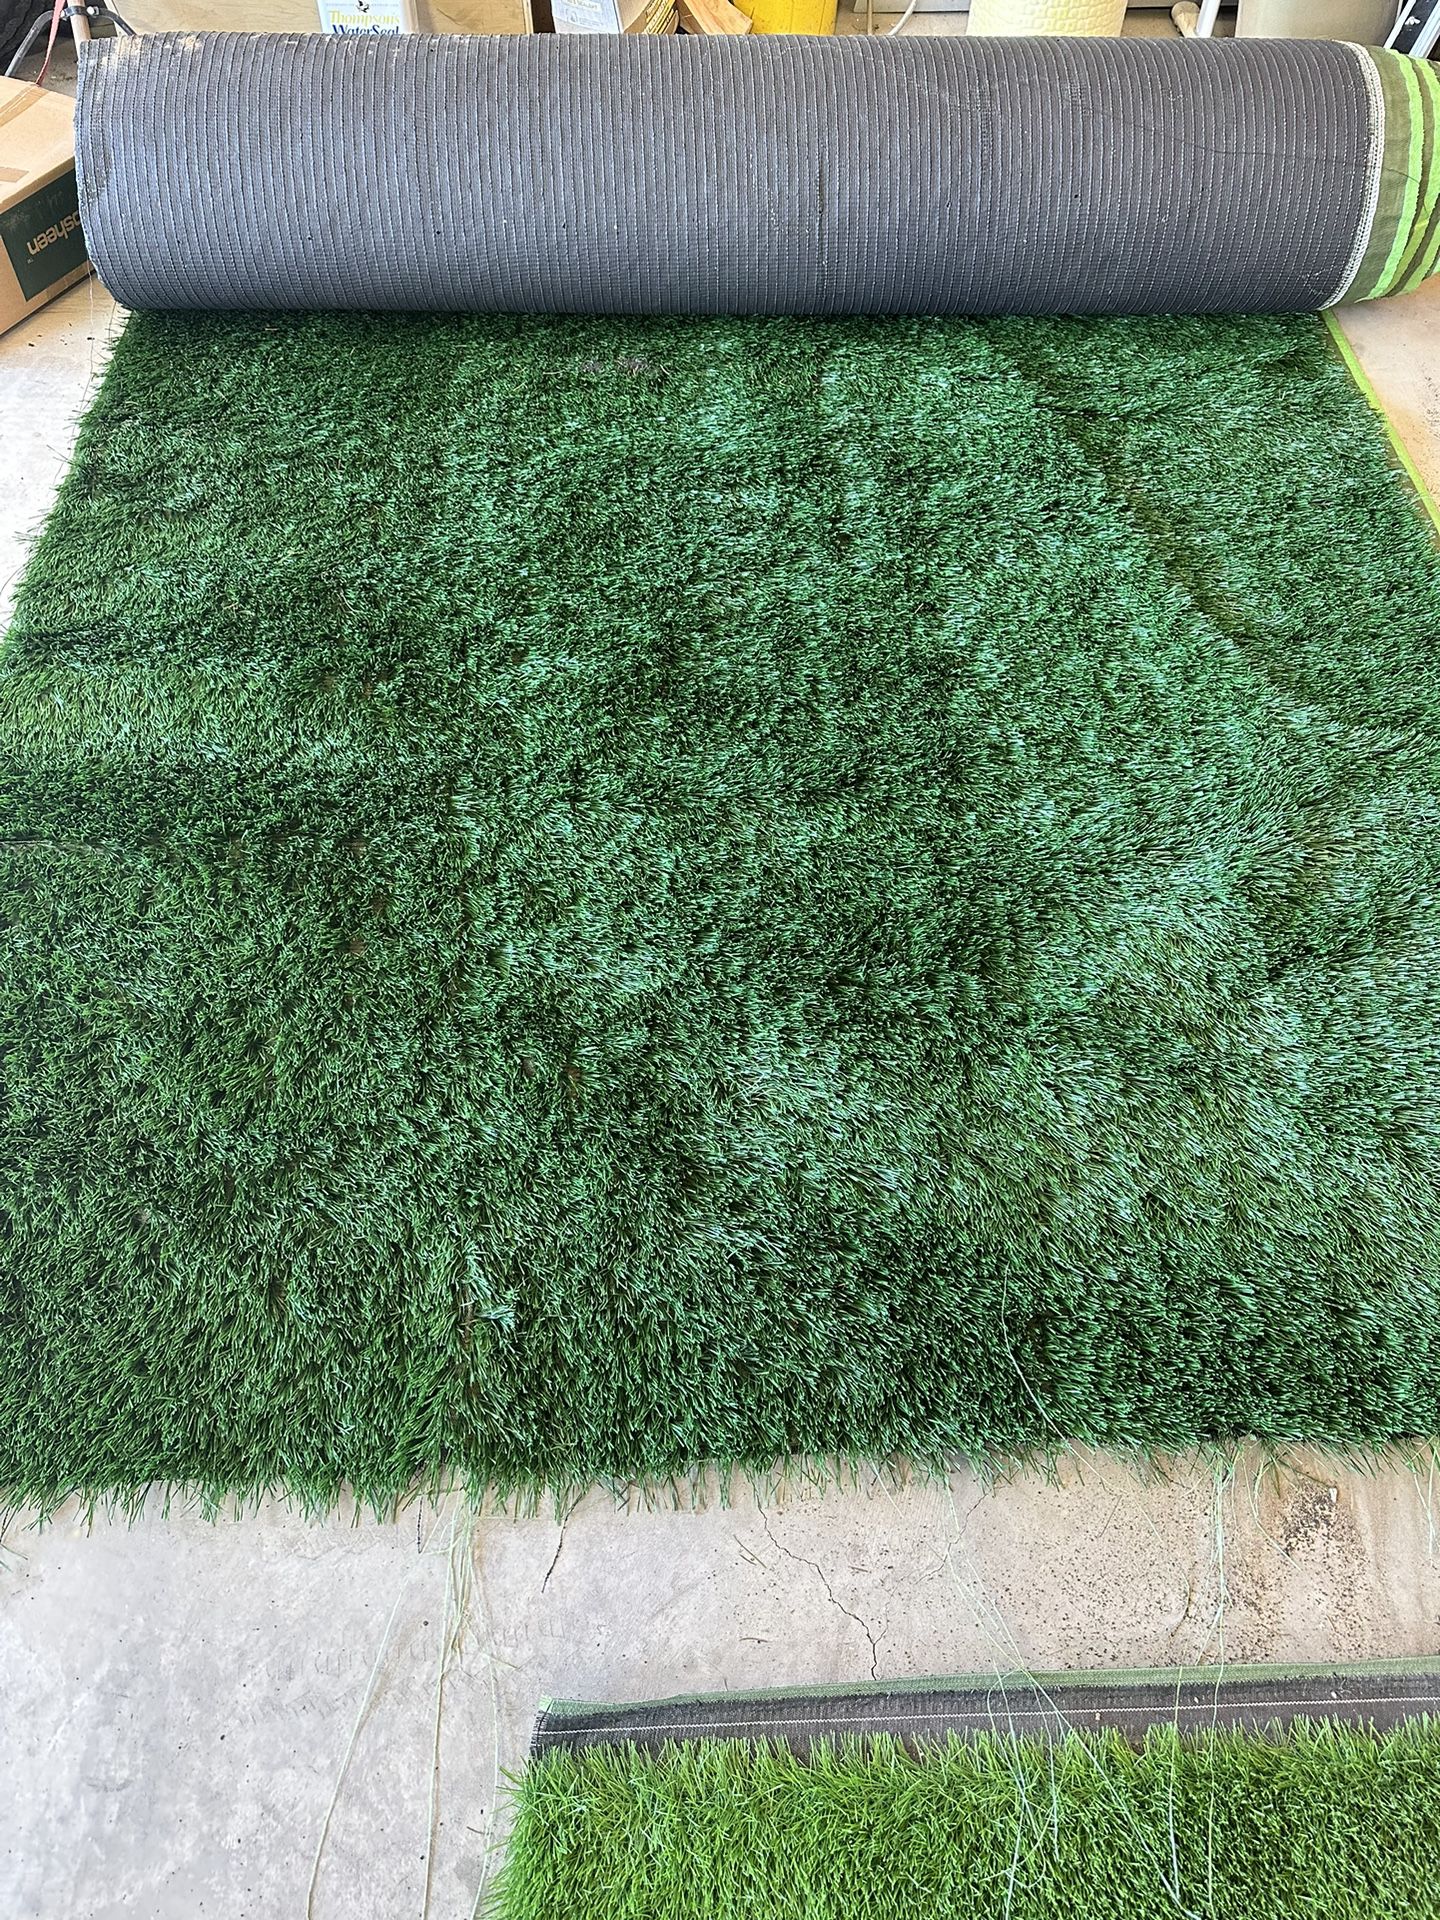 New Turf Artificial Grass 1.00  Square Foot Sports Grass